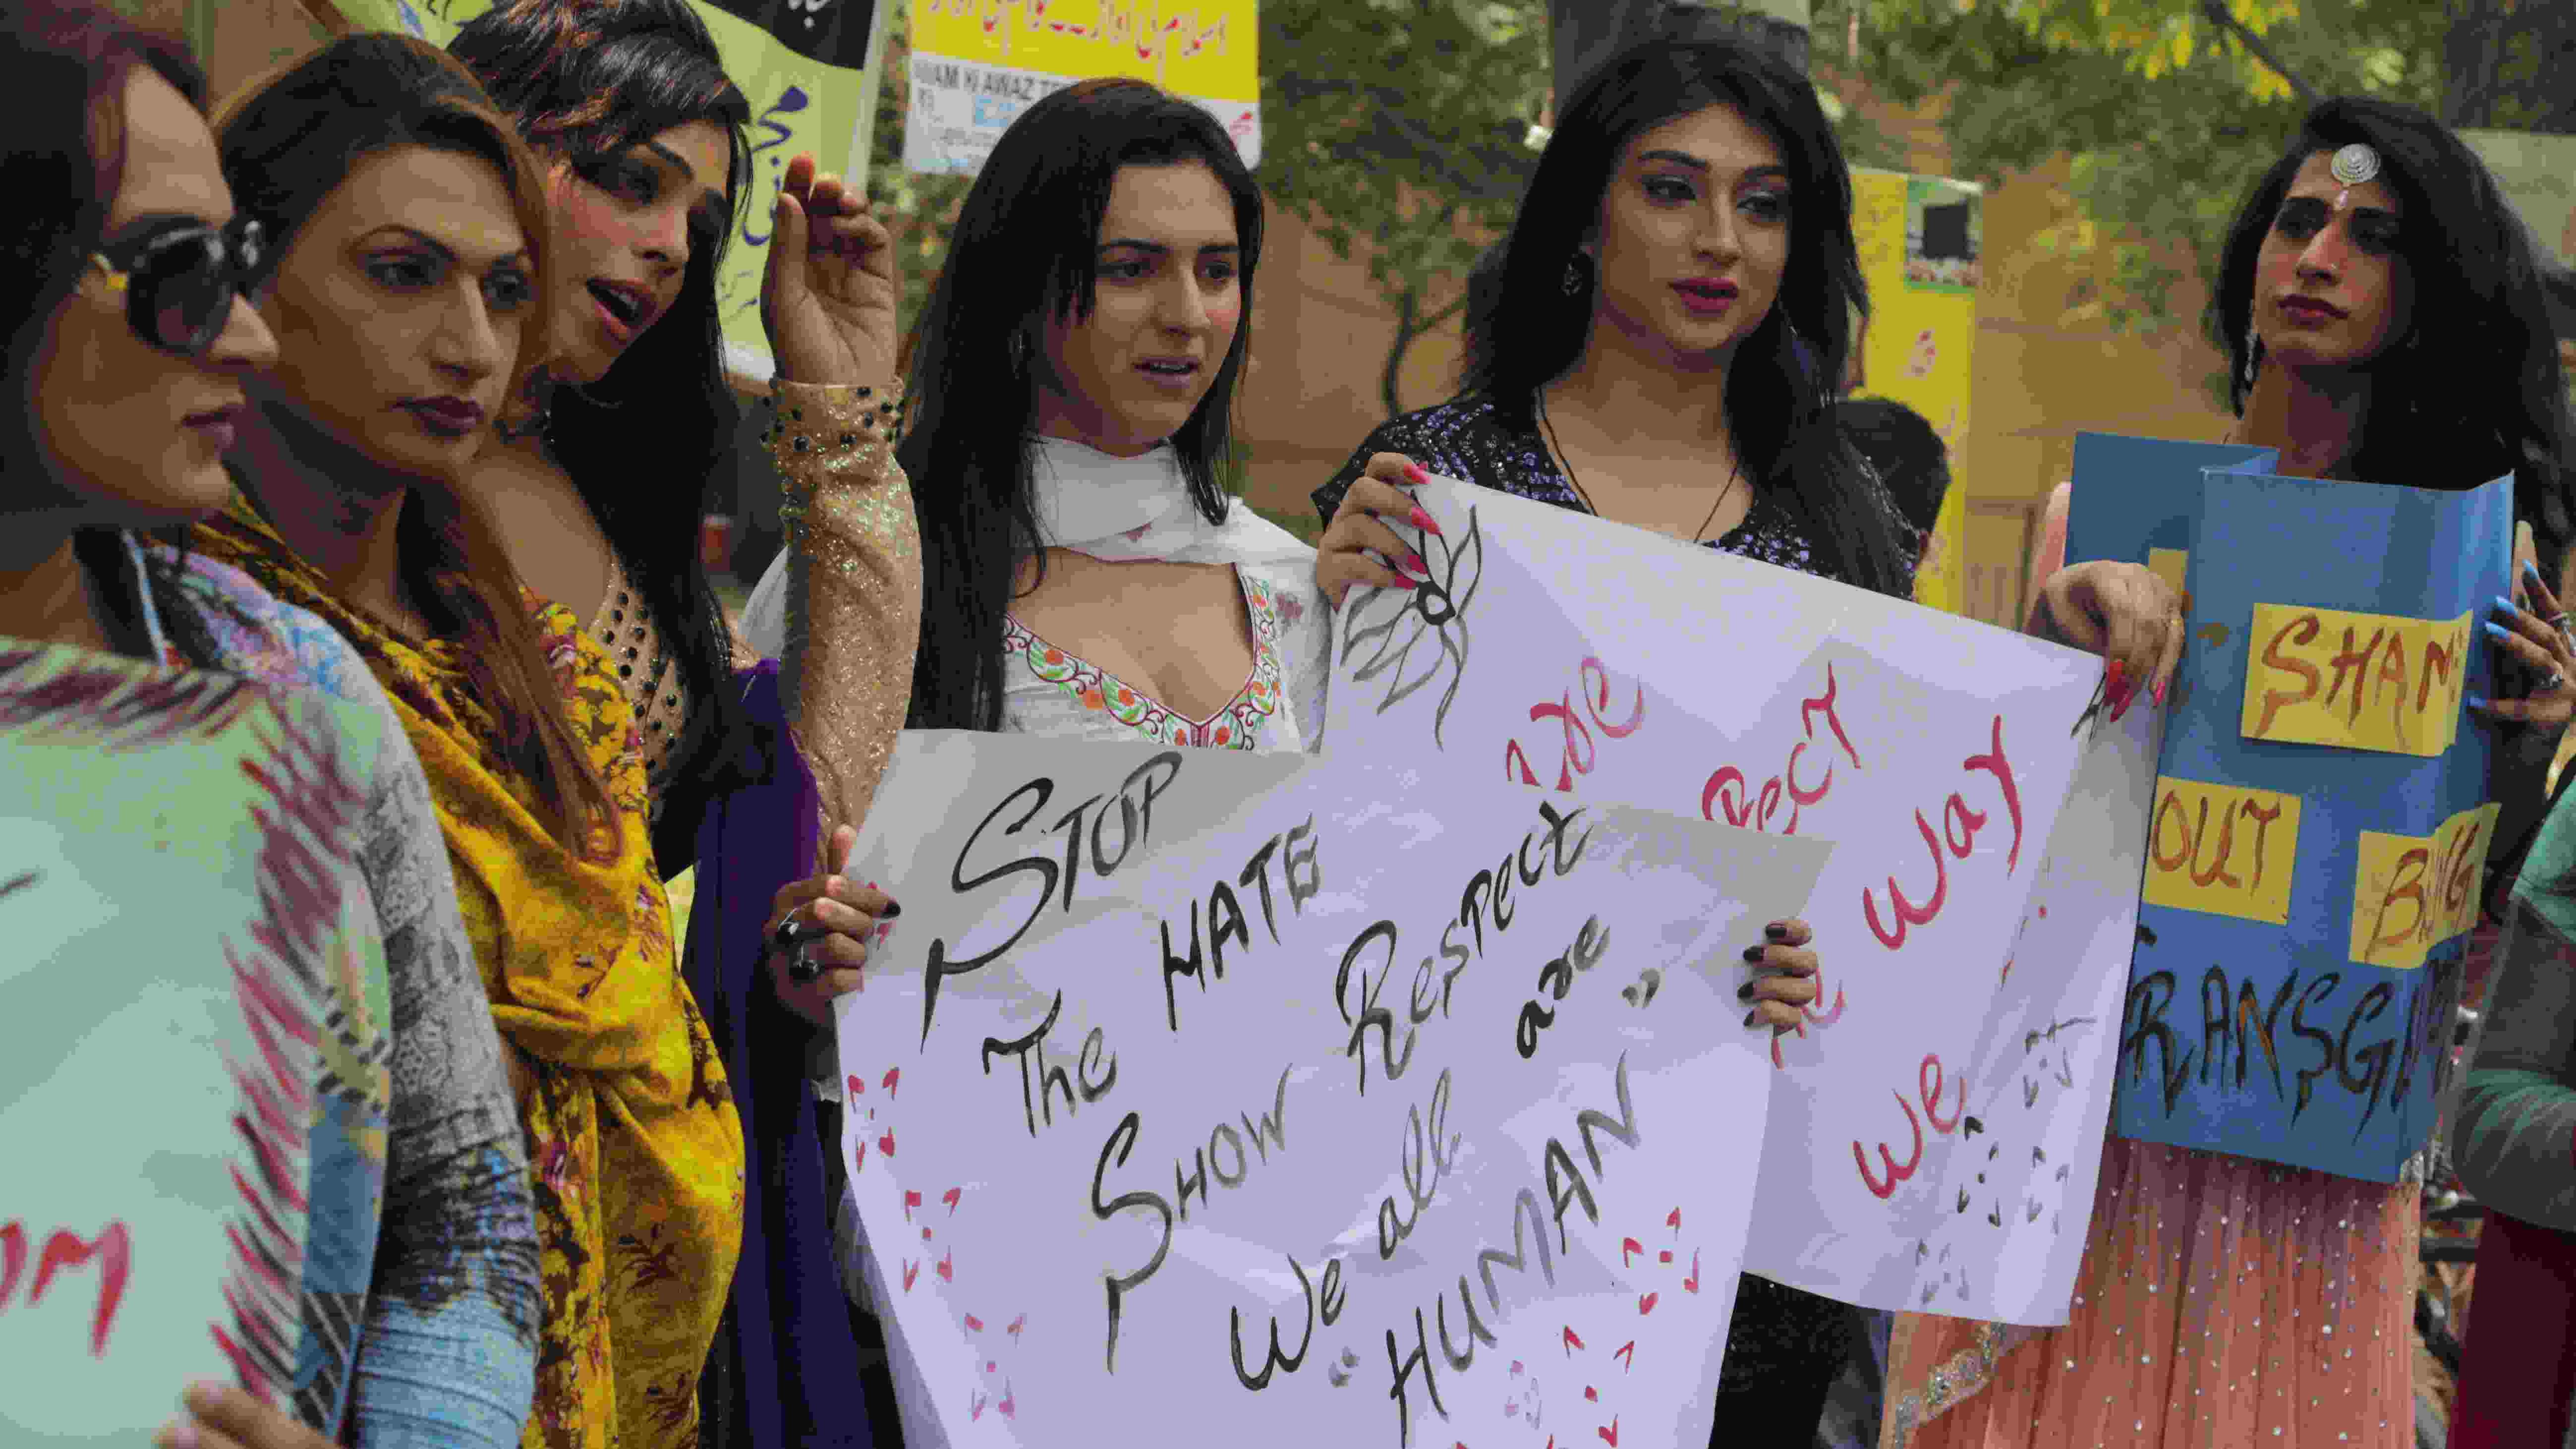 Washington Dc Transsexuals - Pakistan's Punjab replaces 'shemale' with 'transgender' after lawyer's  petition - CGTN